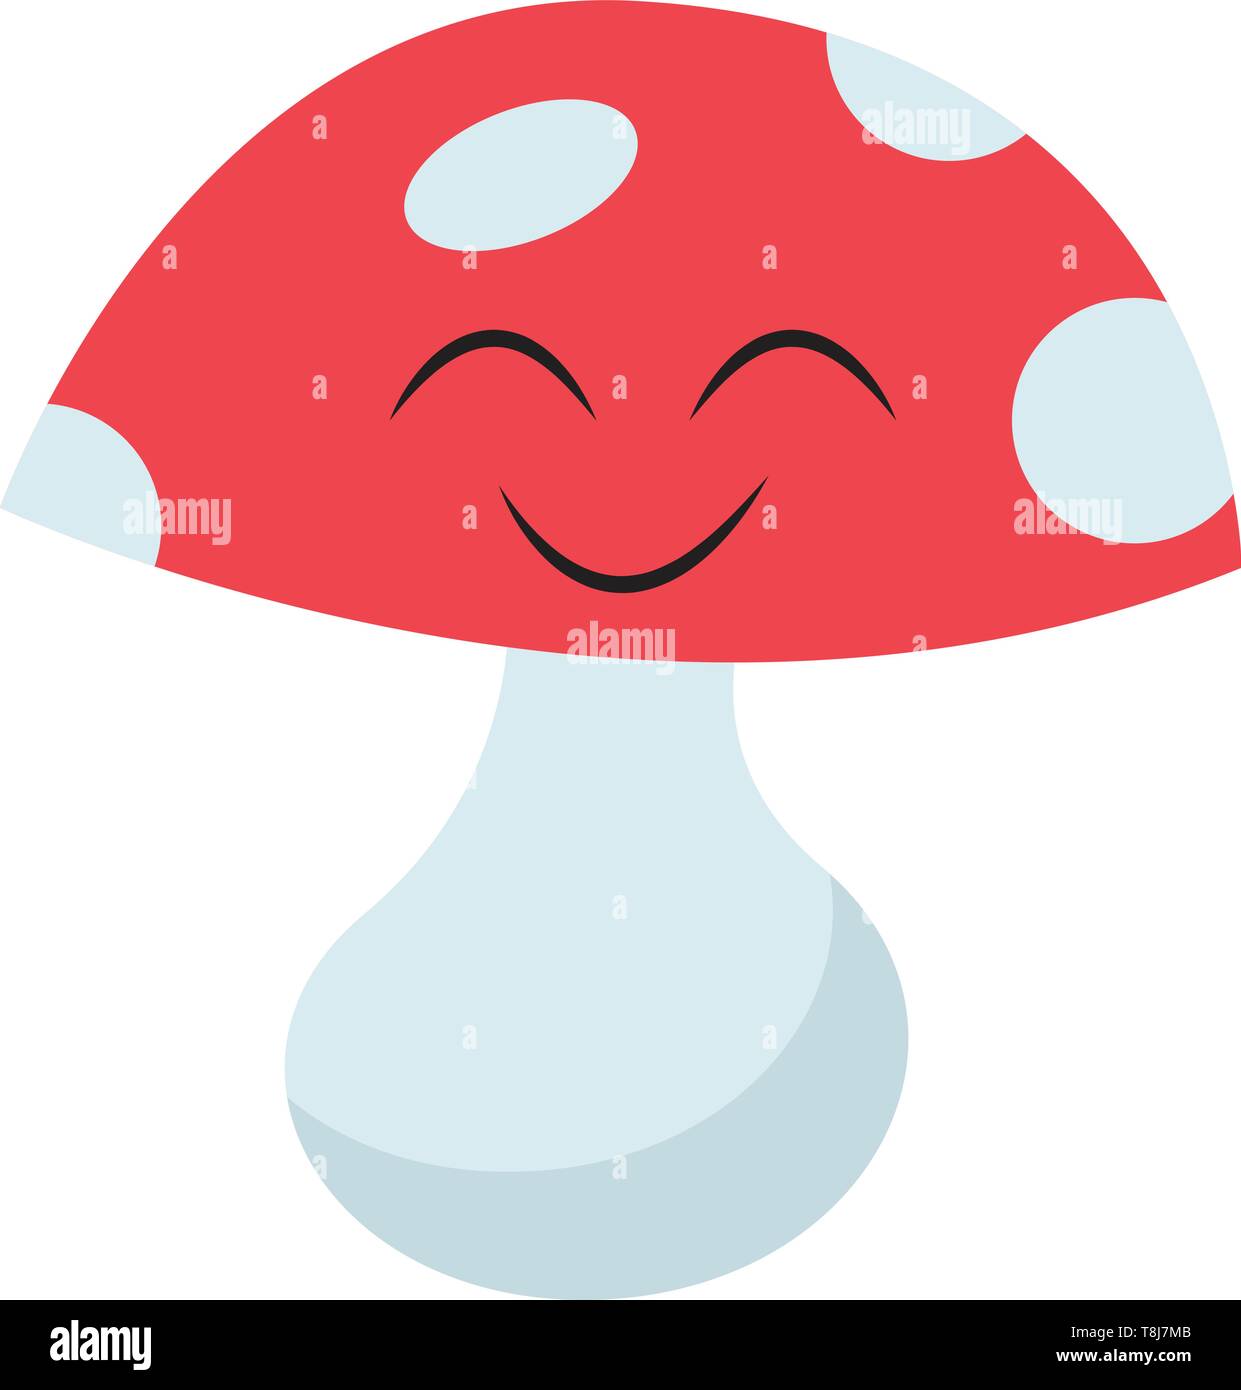 Emoji of a mushroom with spotted blue on a red cap and a stout stem has a face with eyes closed and smile turning up to the cheek looks cute, vector,  Stock Vector